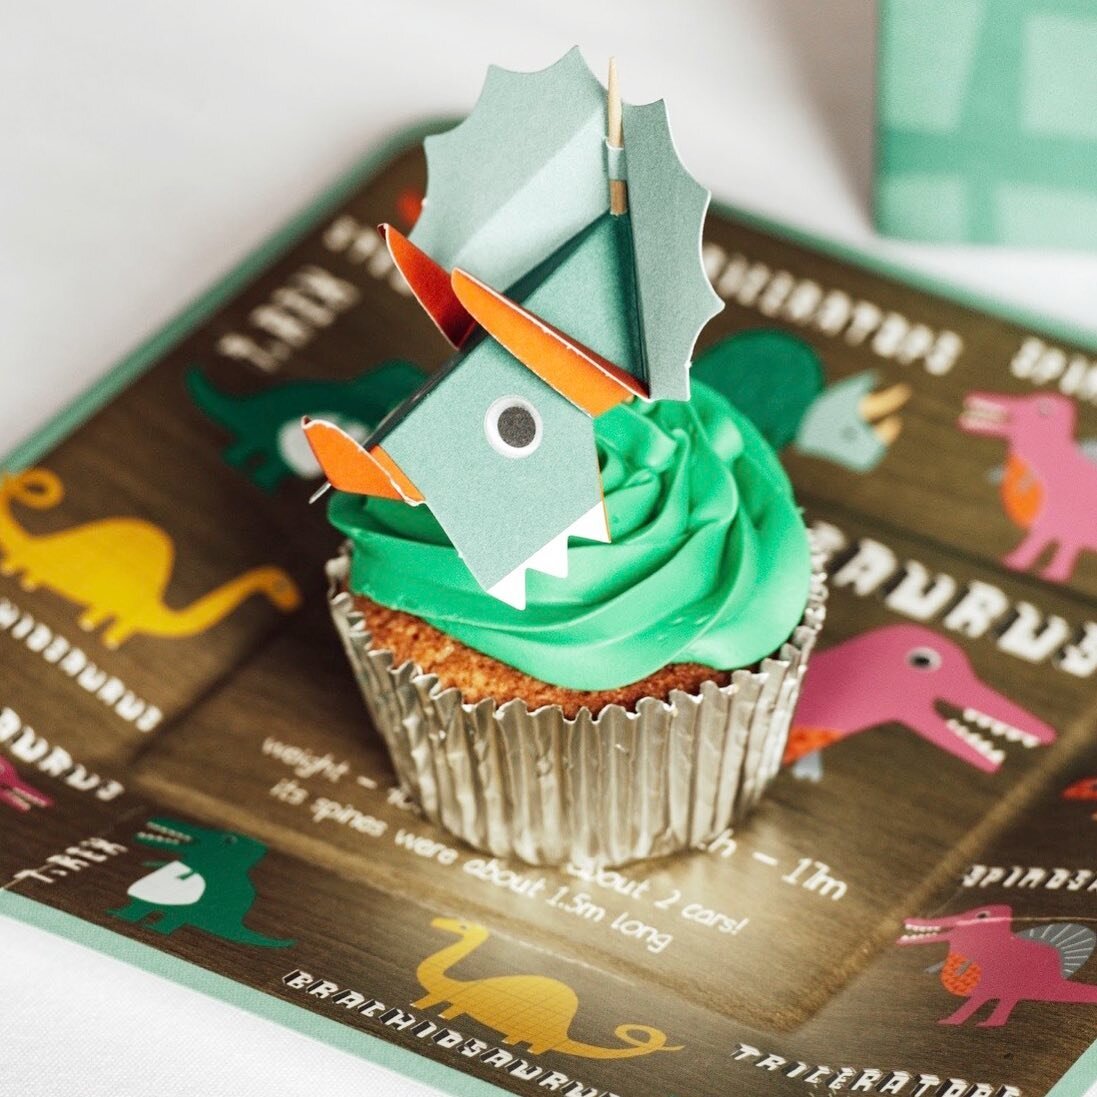 Delicious vanilla cupcakes with a very cute stegosaurus topper. Yummy 😋